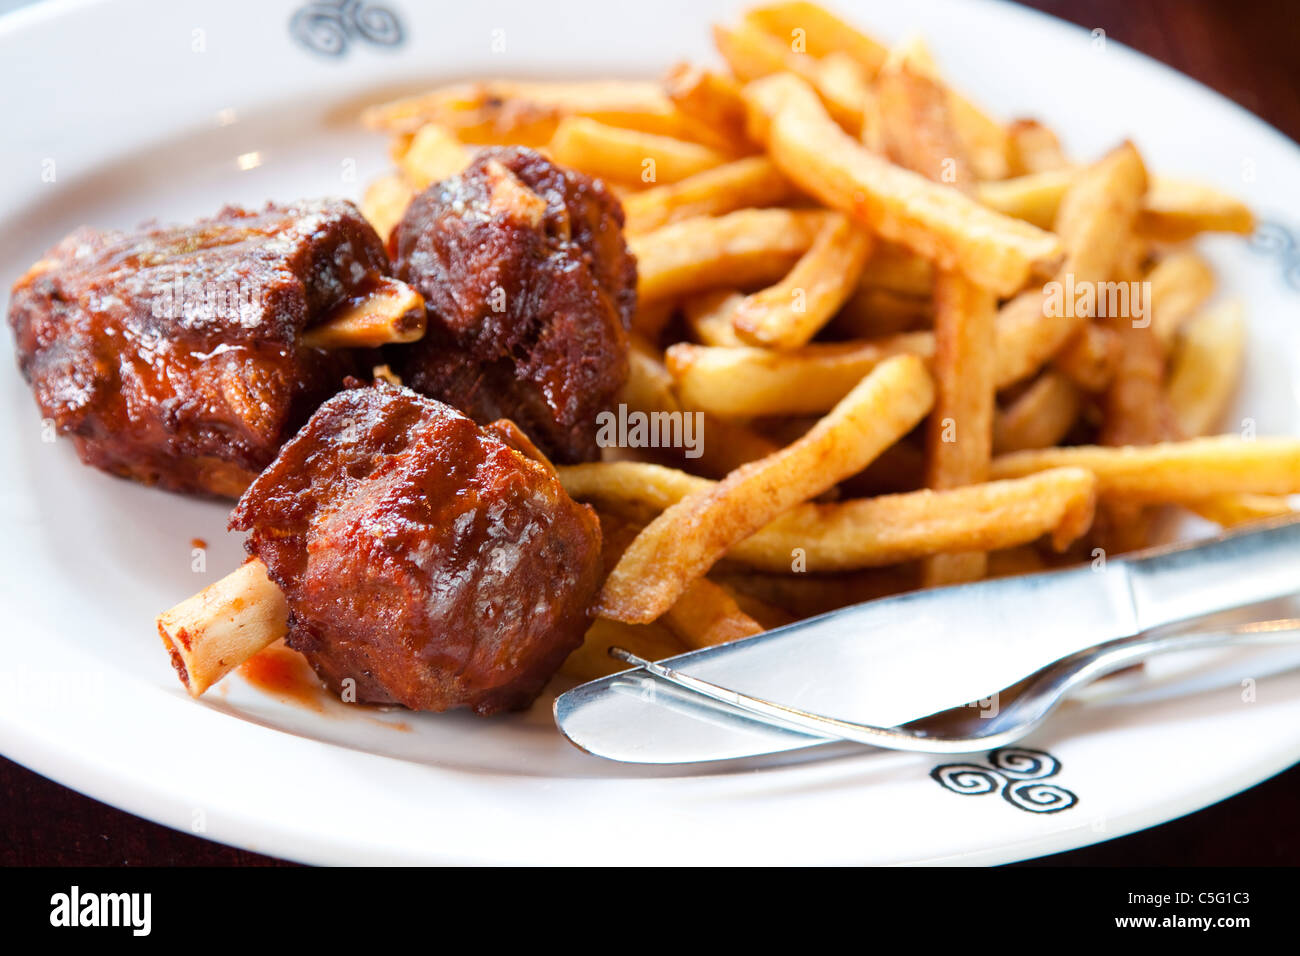 Tender pieces of fall-off-the-bone pork ribs smothered in barbecue sauce. Served with crisp hand-cut fries. Stock Photo